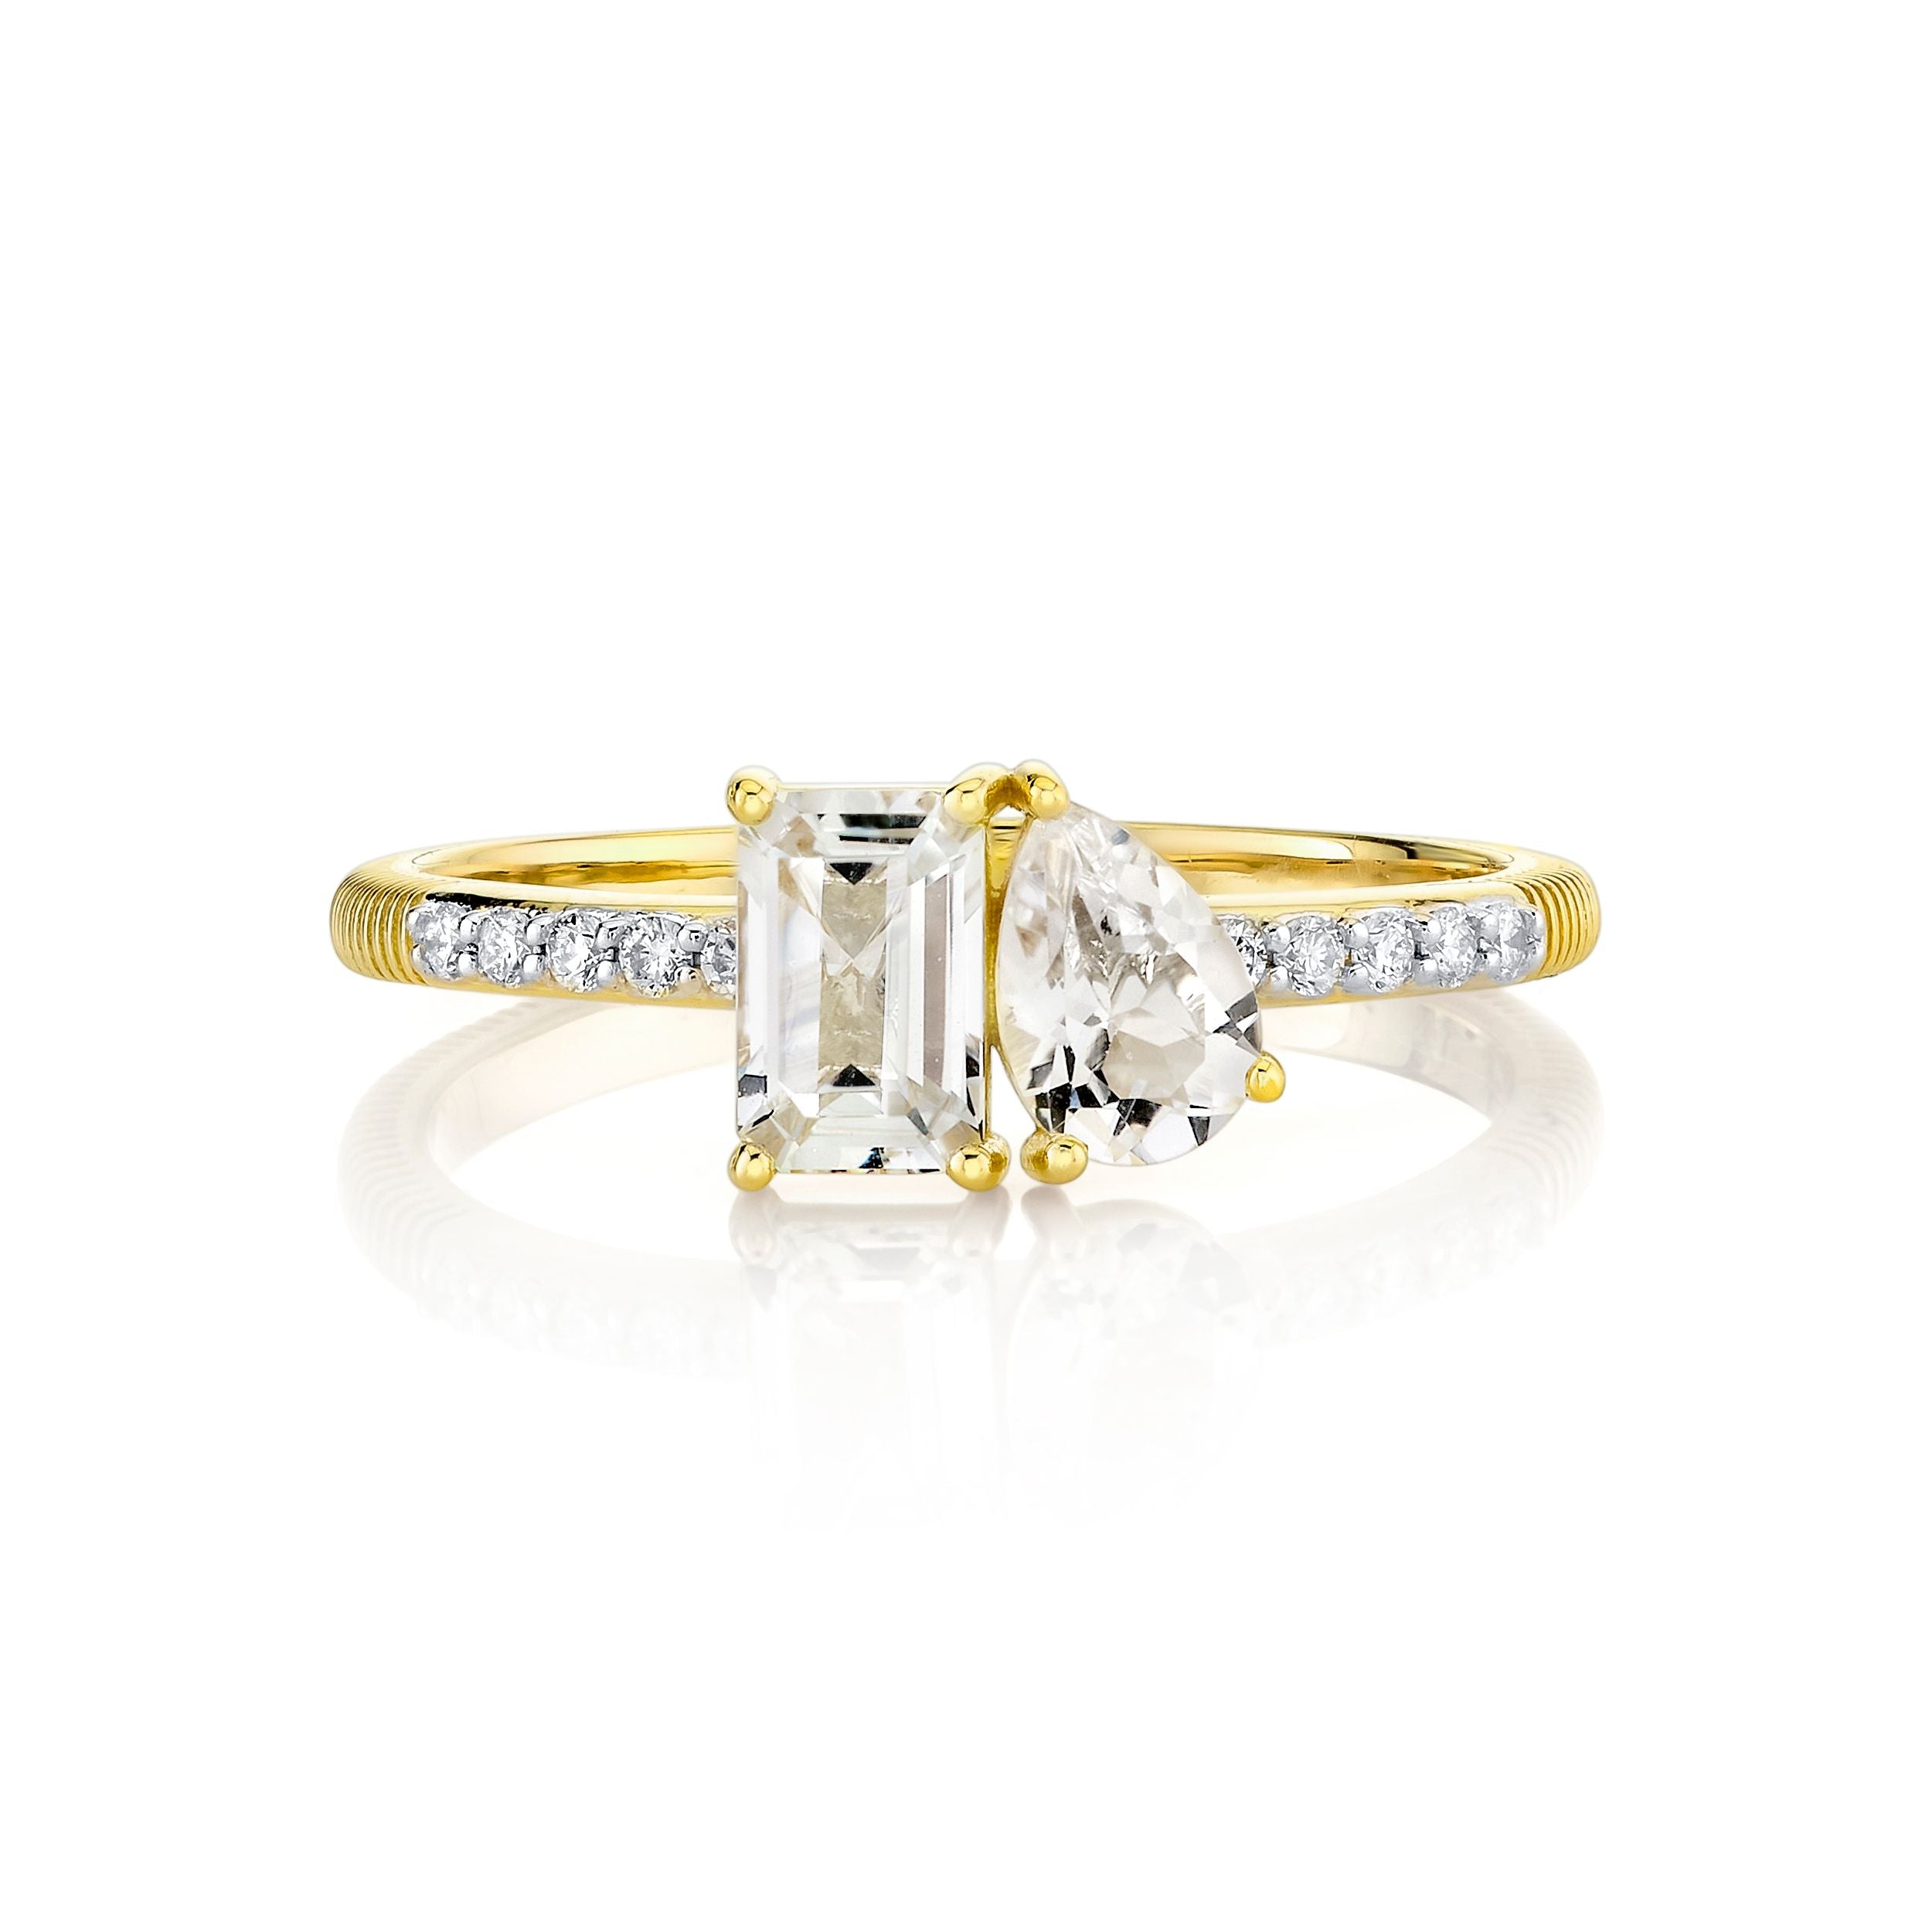 Yellow Gold Open Ring with White Topaz Pear Shape and Emerald Cut